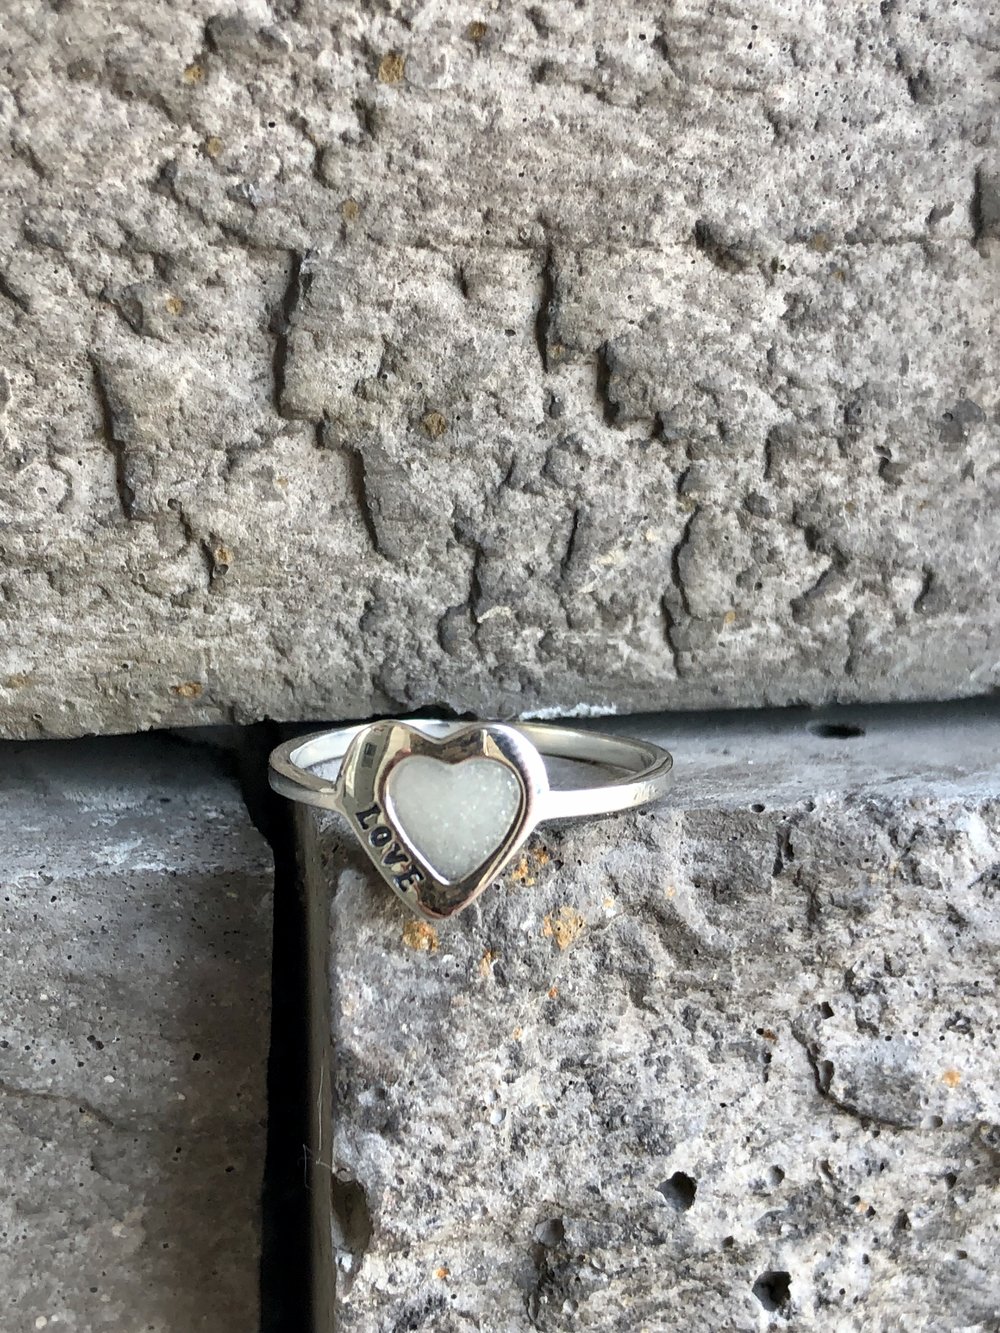 Glow in the Dark Star ring (adjustable size) — Made With Love Keepsakes  Breastmilk & Dna Jewelry